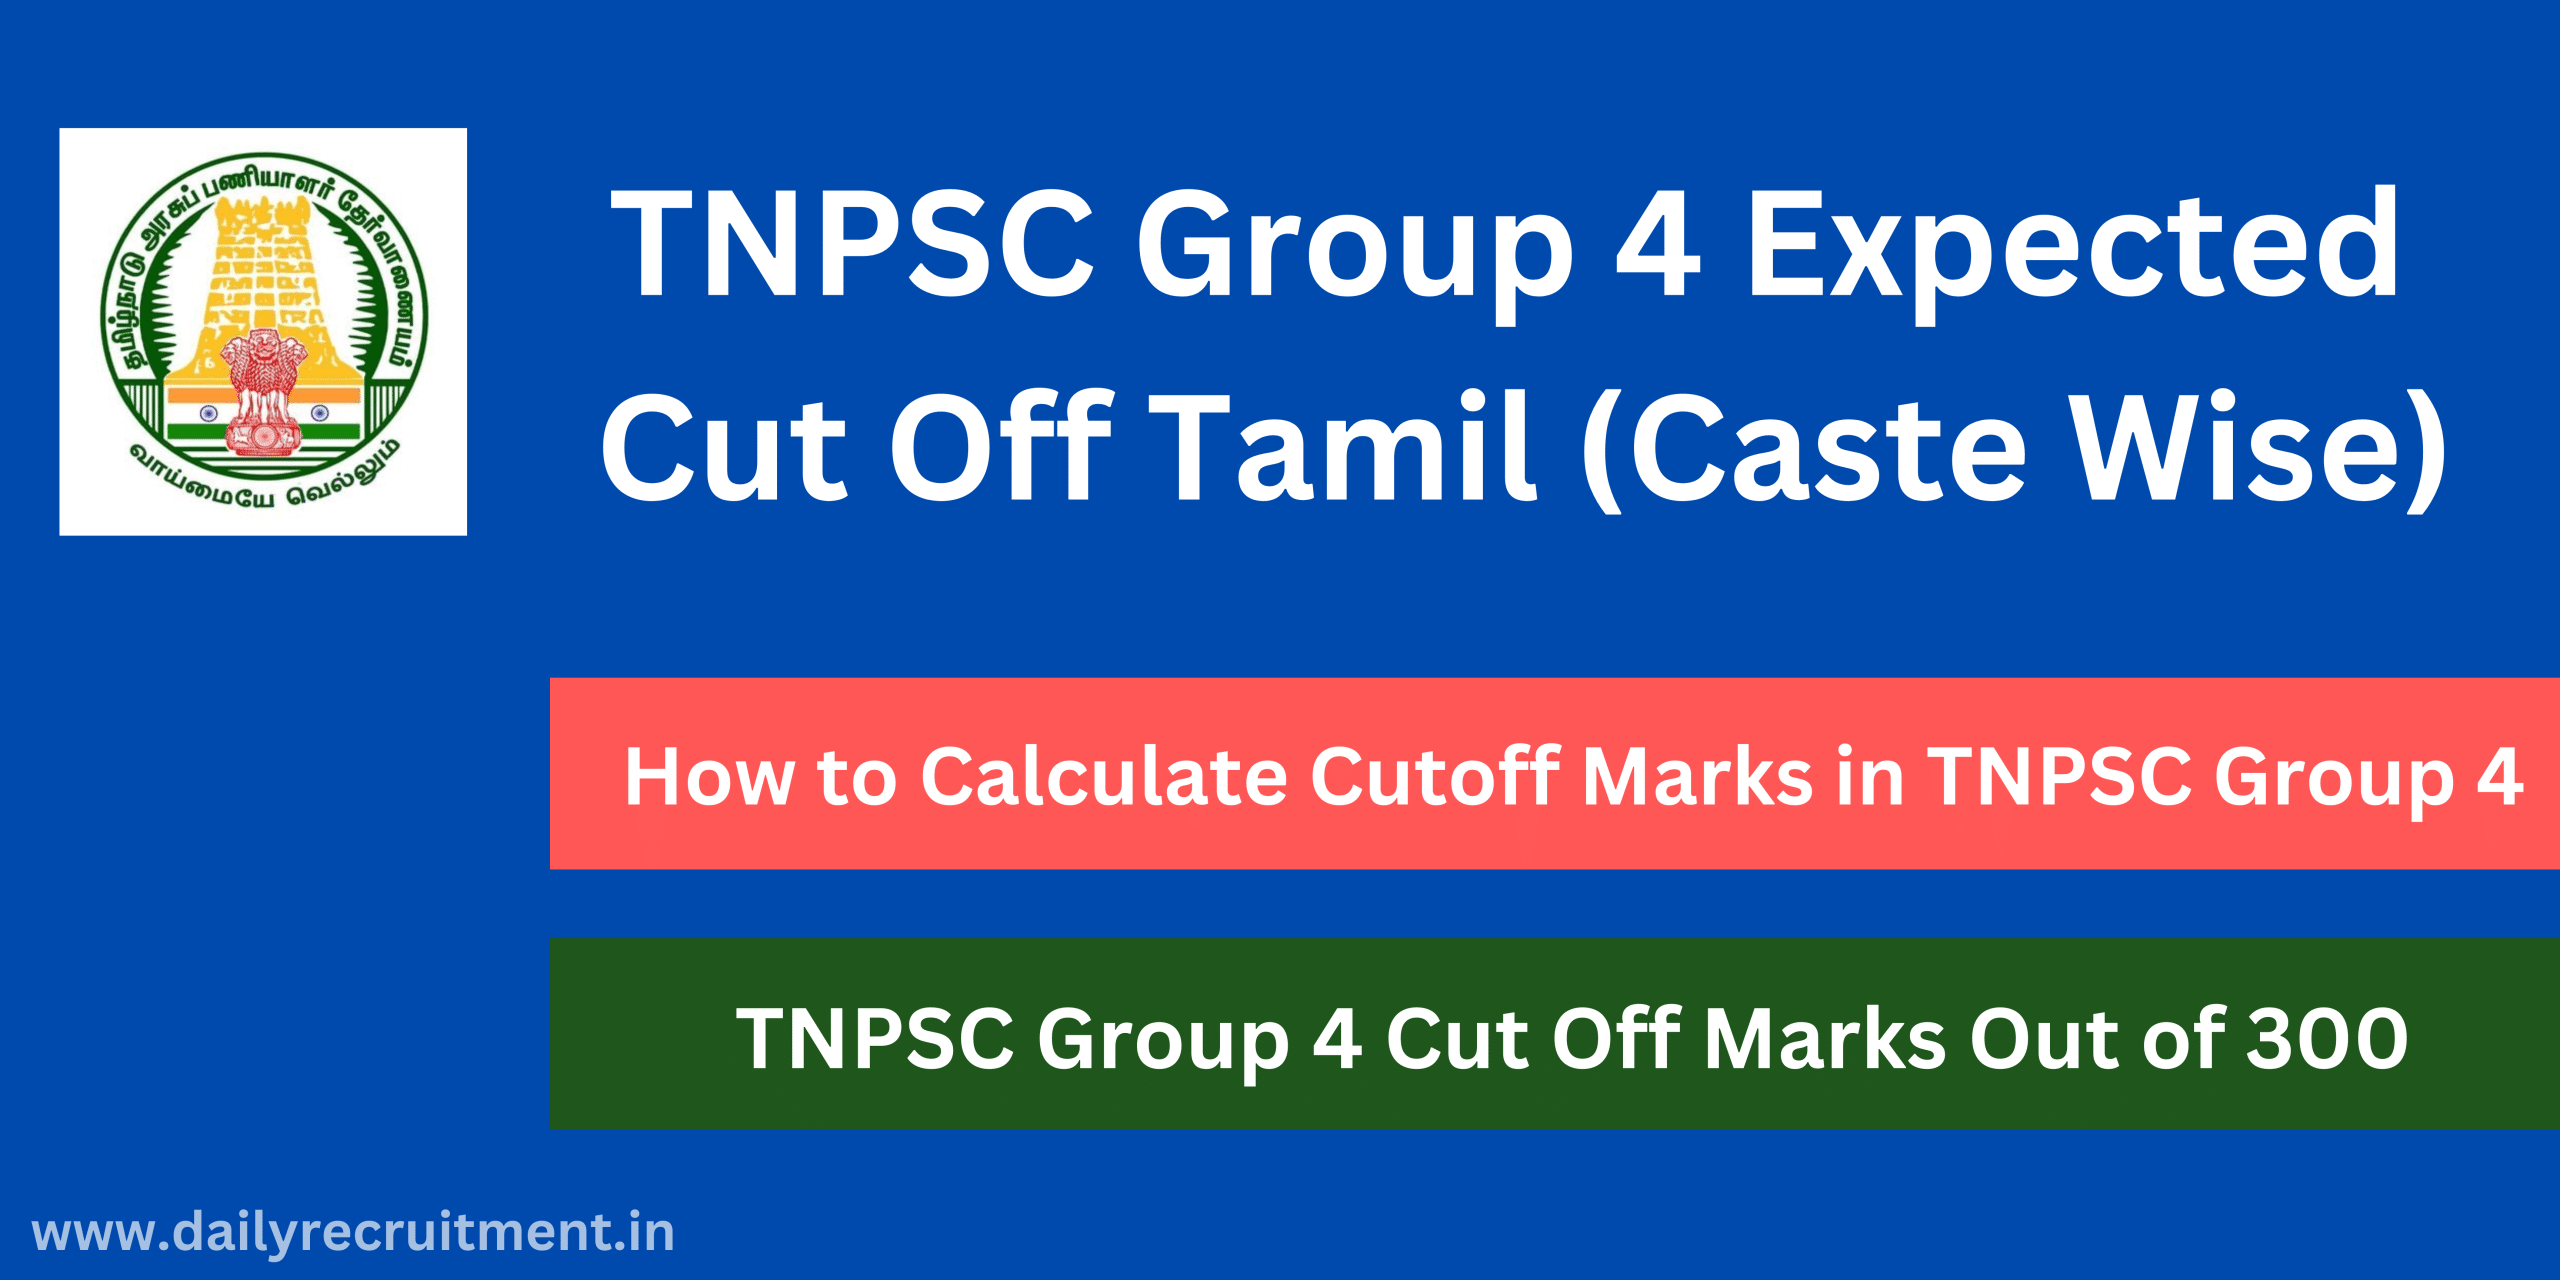 TNPSC Group 4 Expected Cut Off